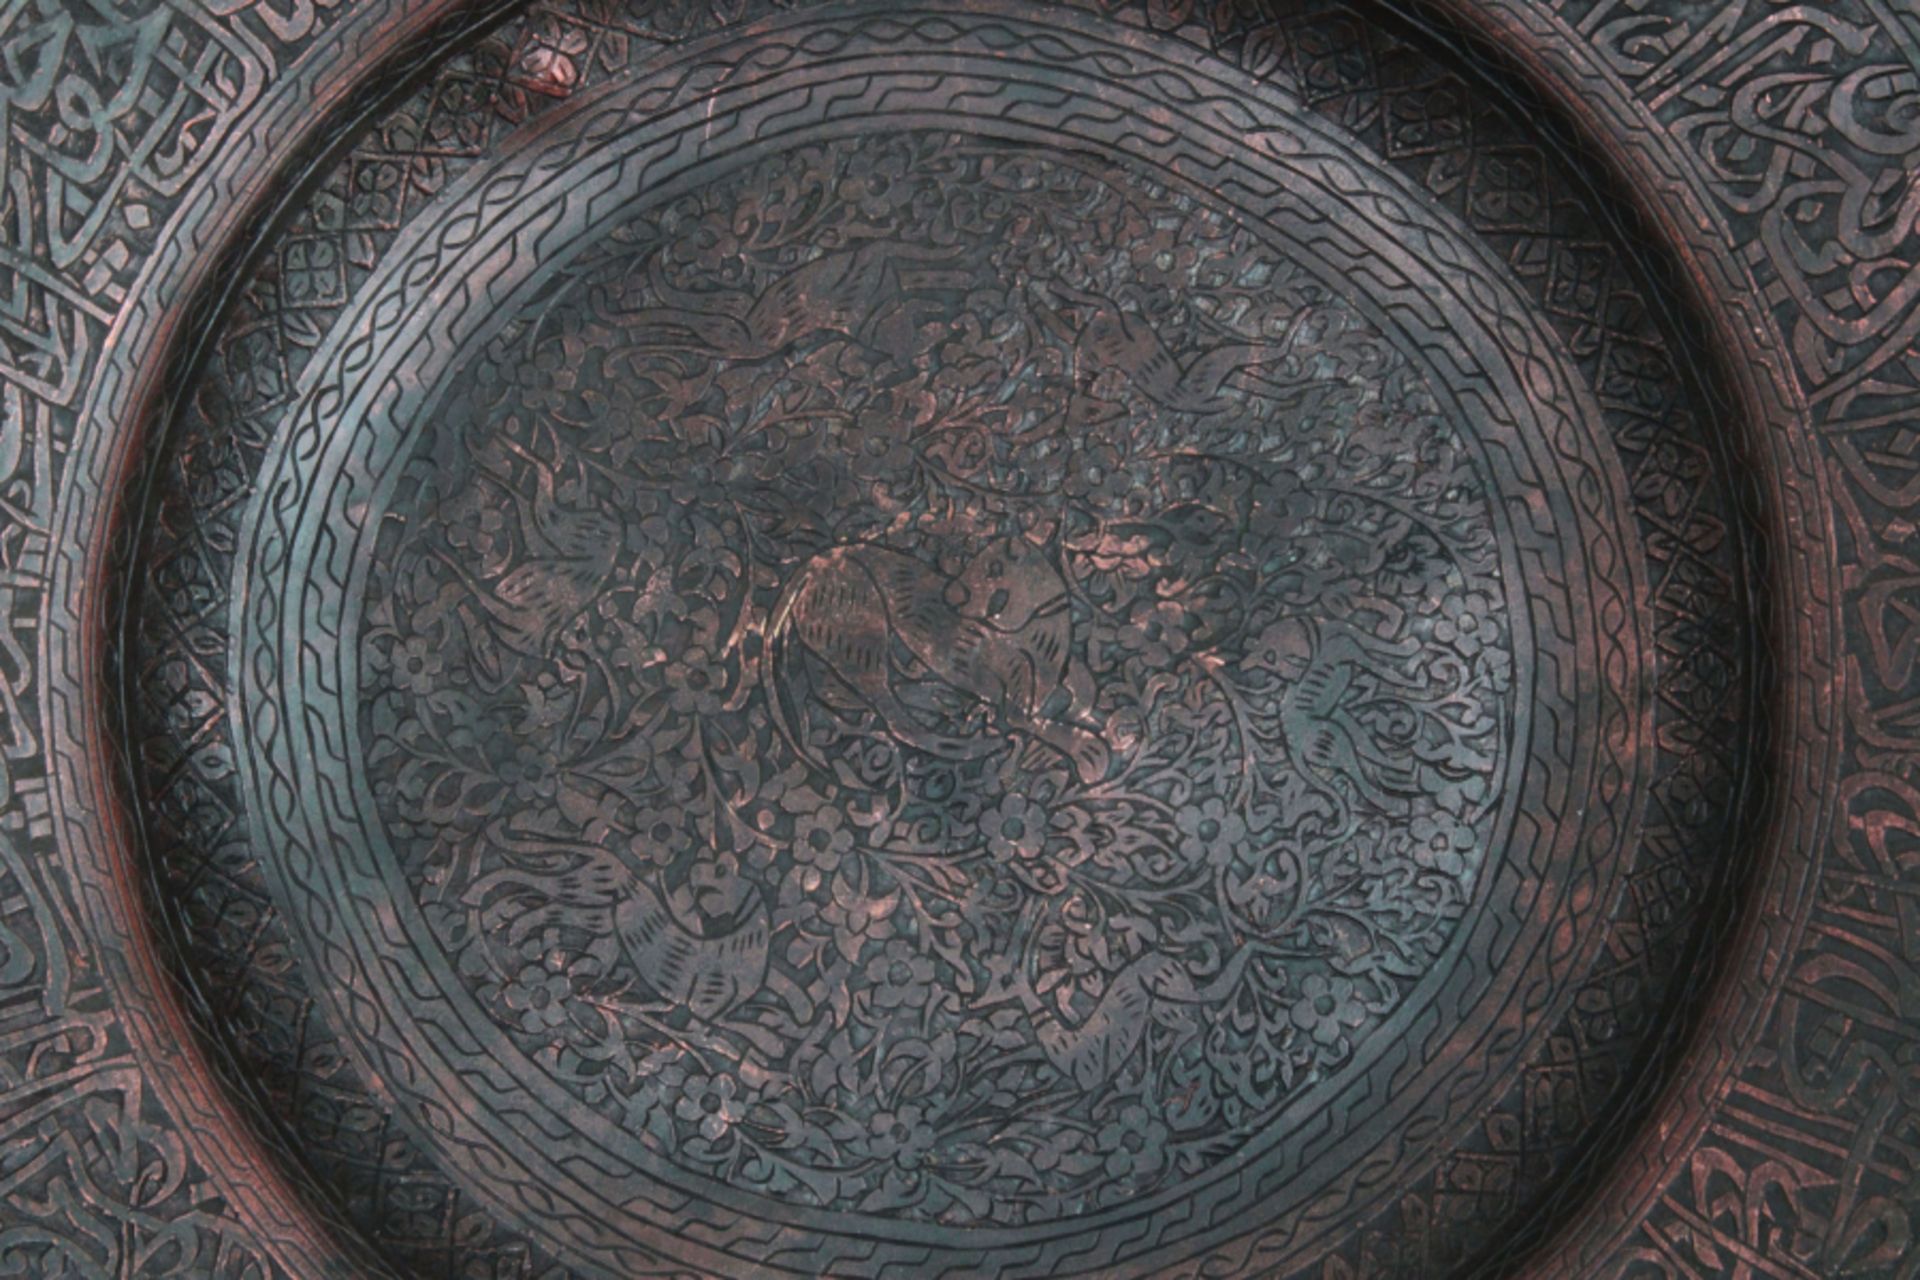 Islamic decorated plate - Image 3 of 5